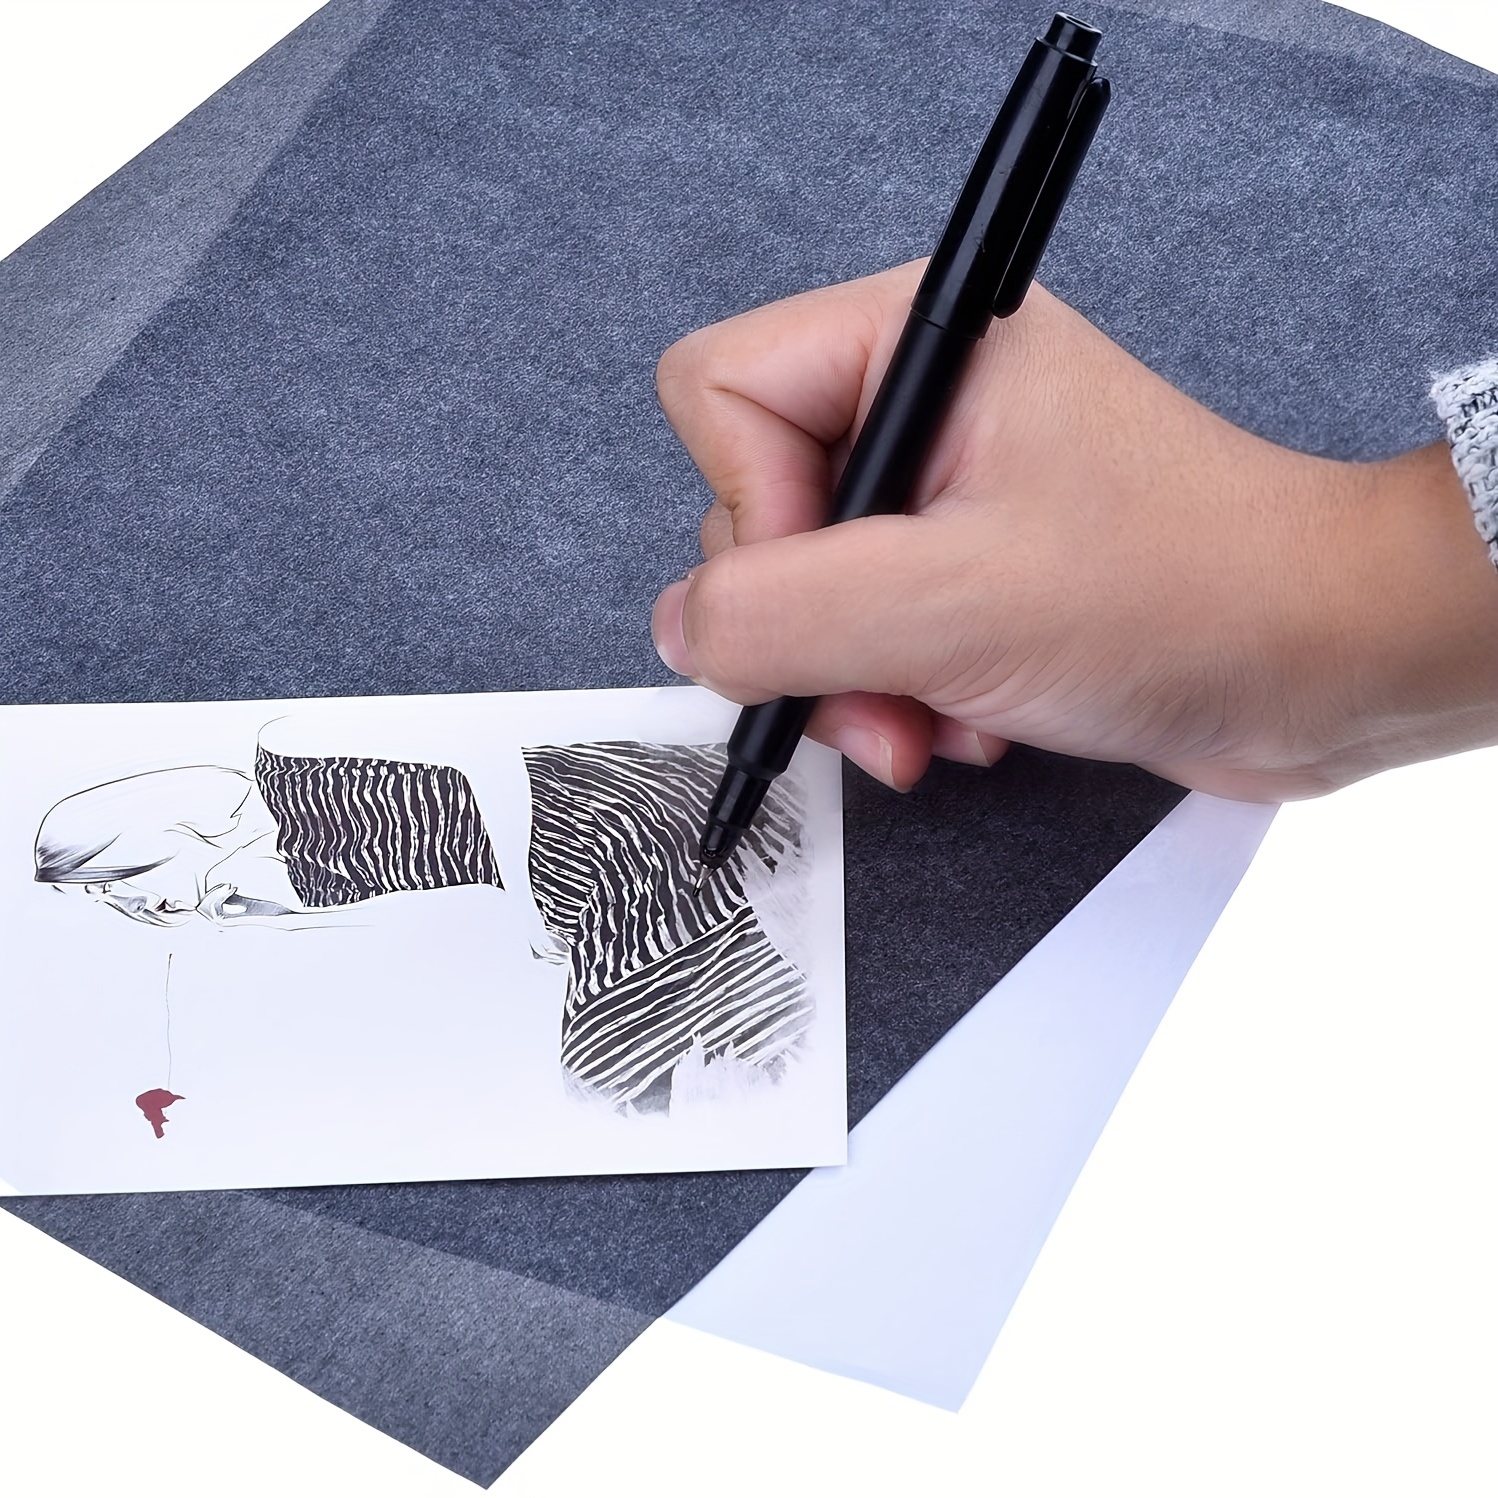 50 Sheets/Bag Transfer Paper Tracing Paper Graphite Carbon Paper Painting